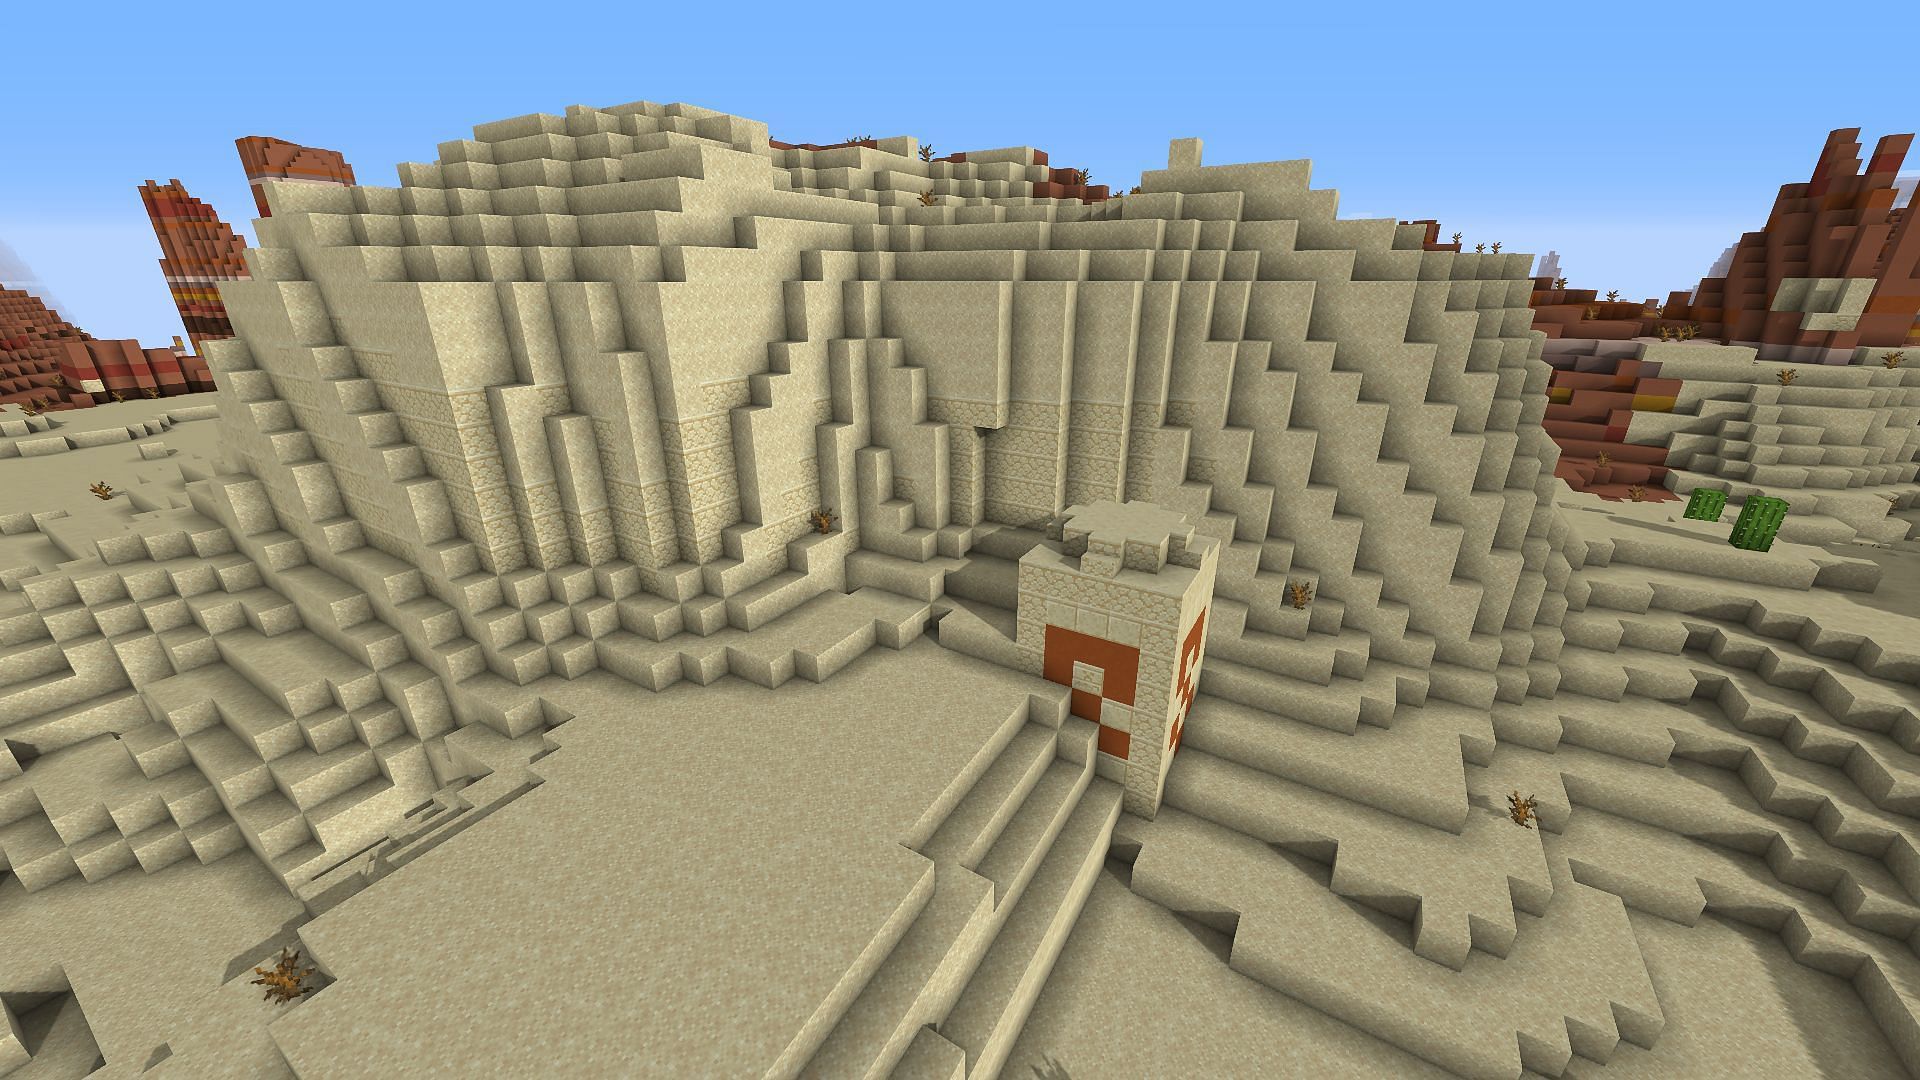 The mostly buried desert temple found on the seed near spawn (Image via Minecraft)